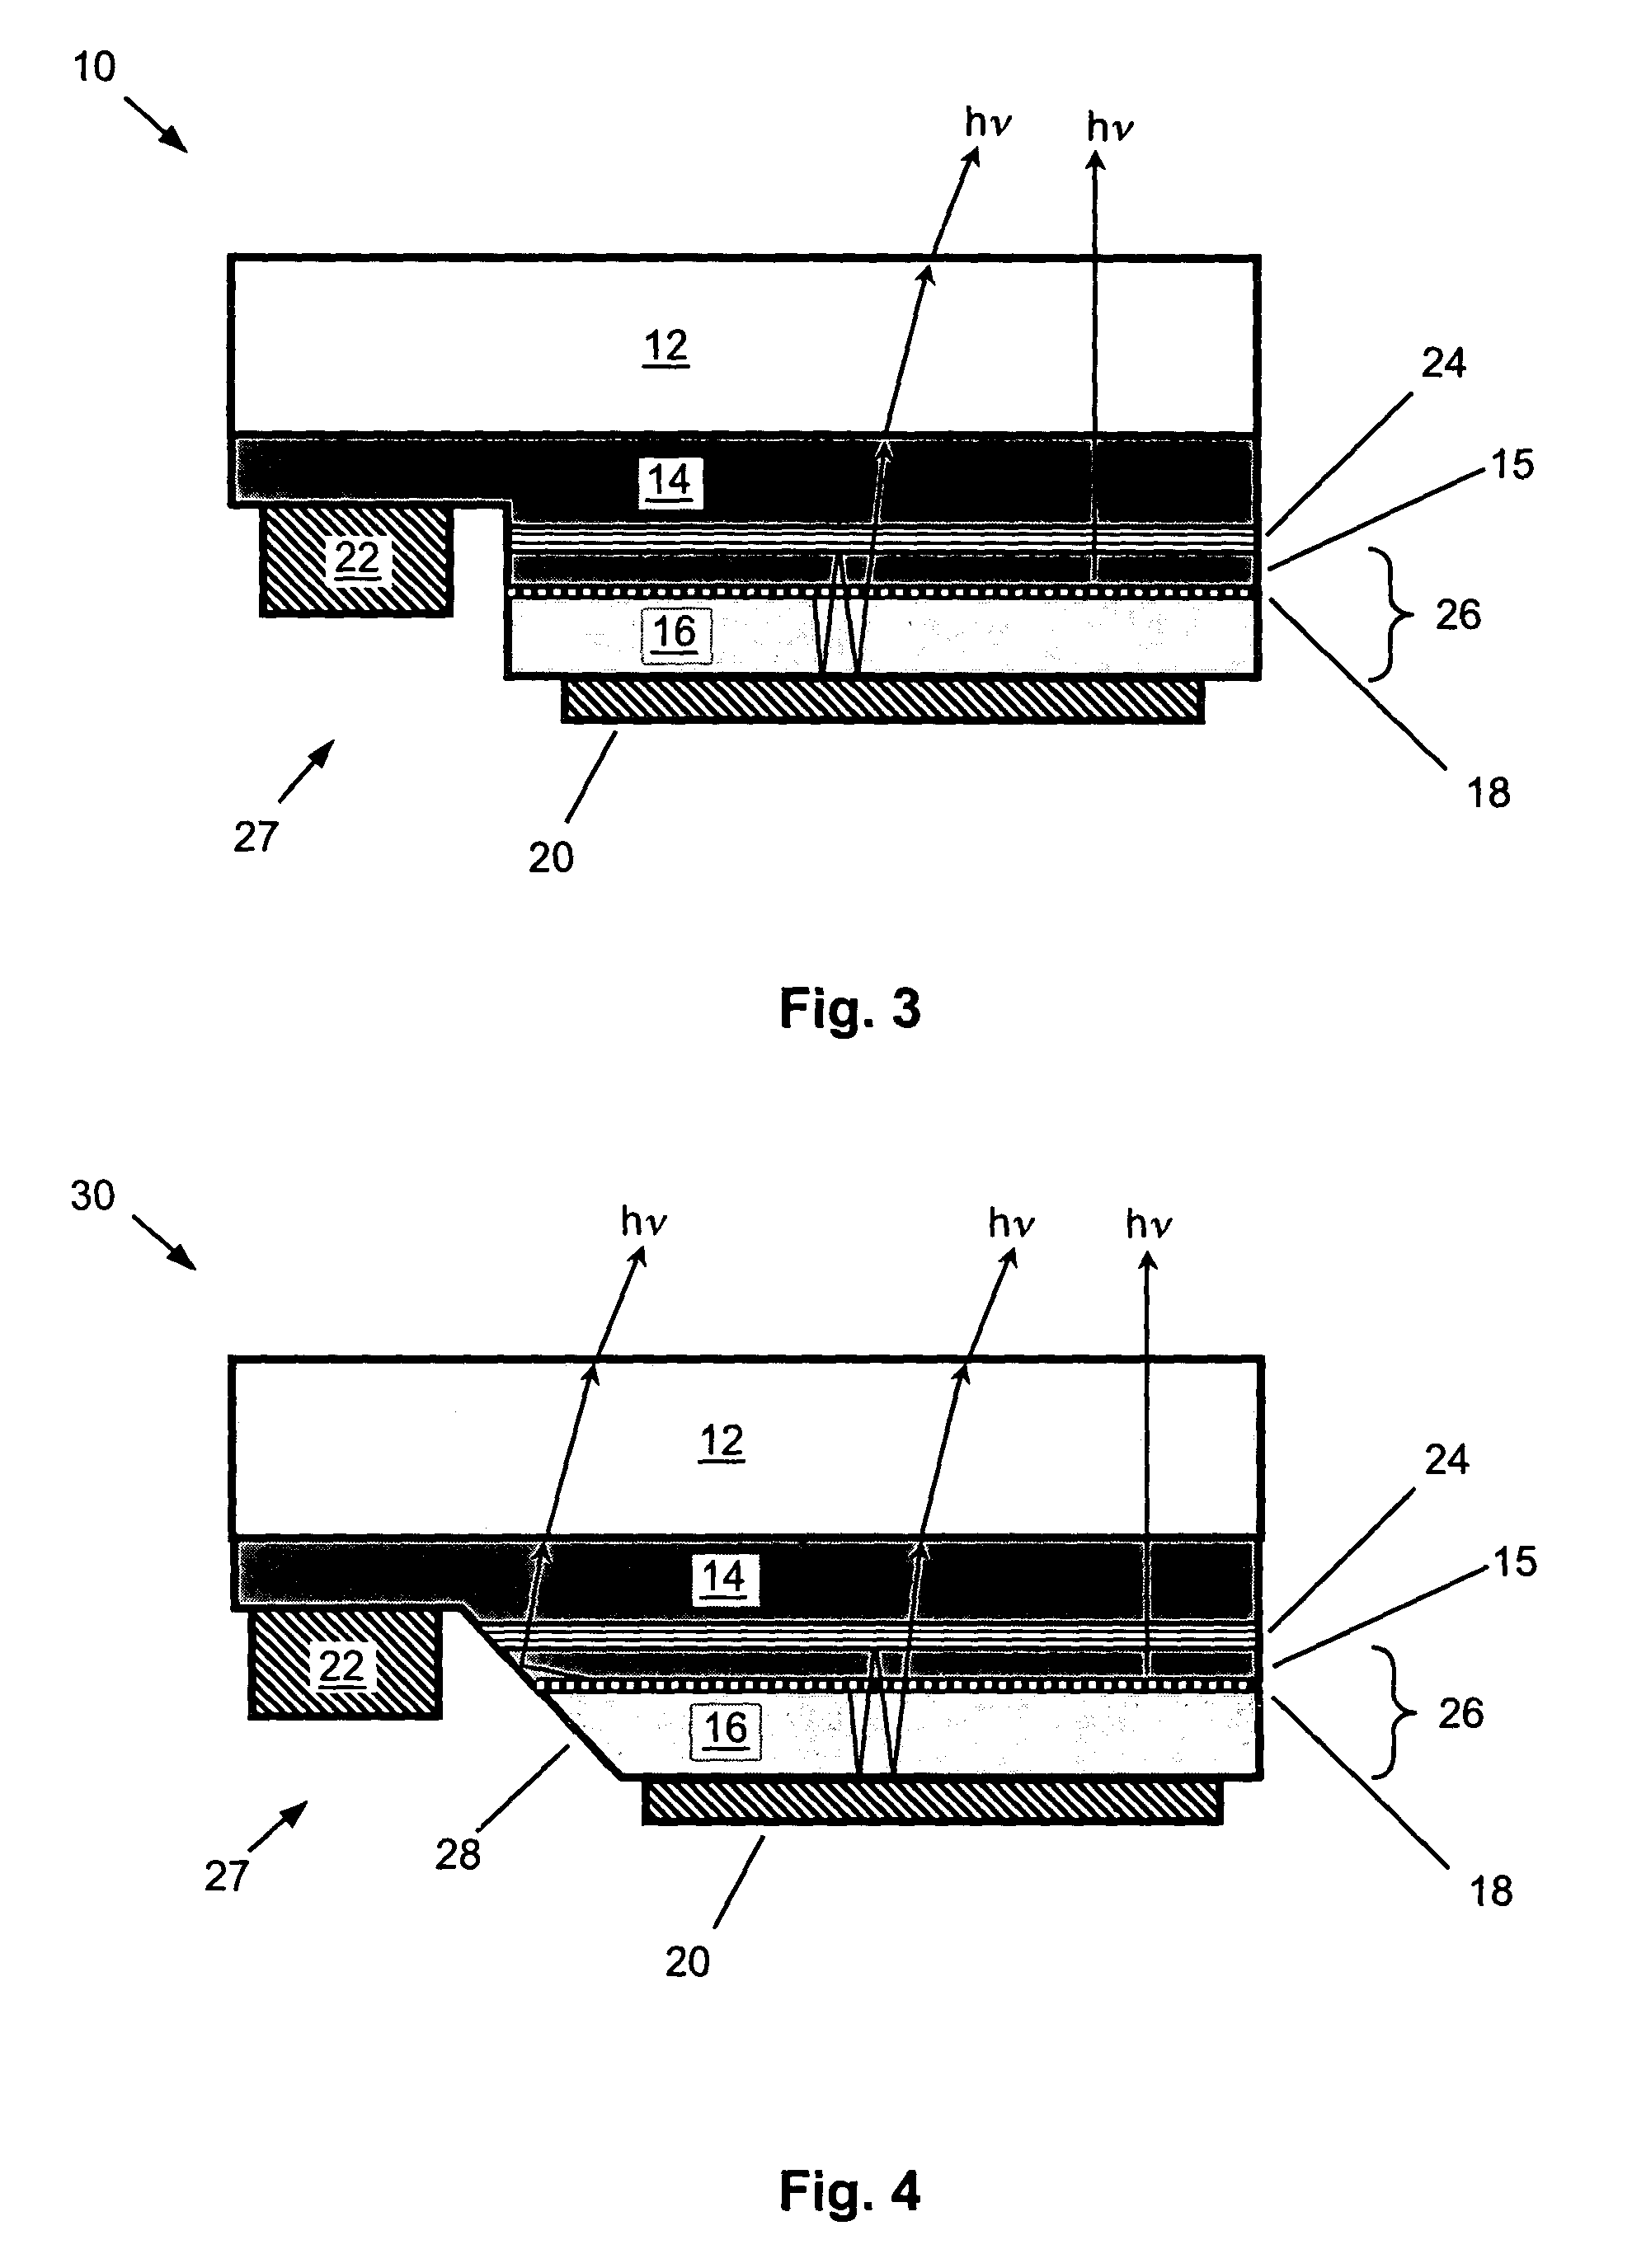 Flip-chip light emitting diode with resonant optical microcavity